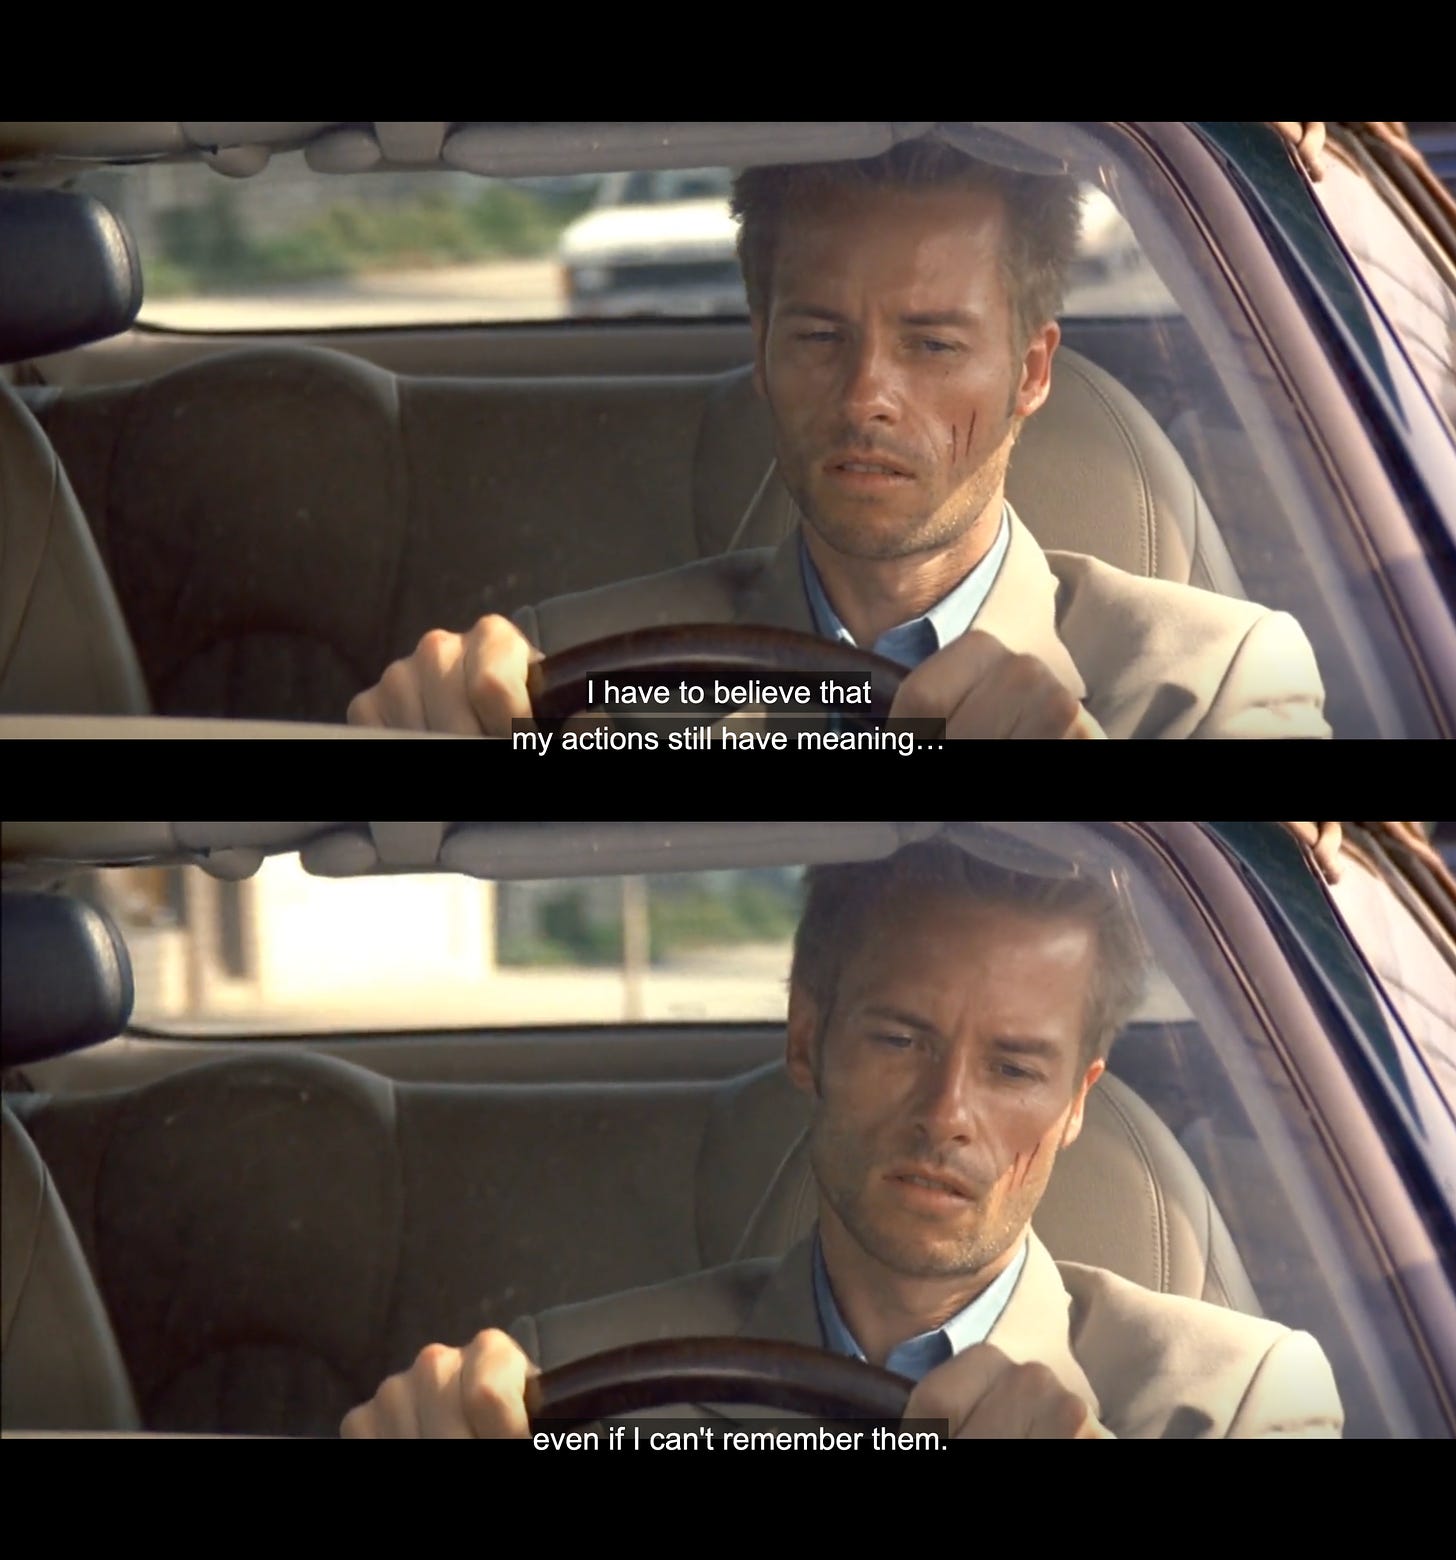 Memento scene with Leonard in the car, thinking: "I have to believe my actions still have meaning, even if I can't remember them."